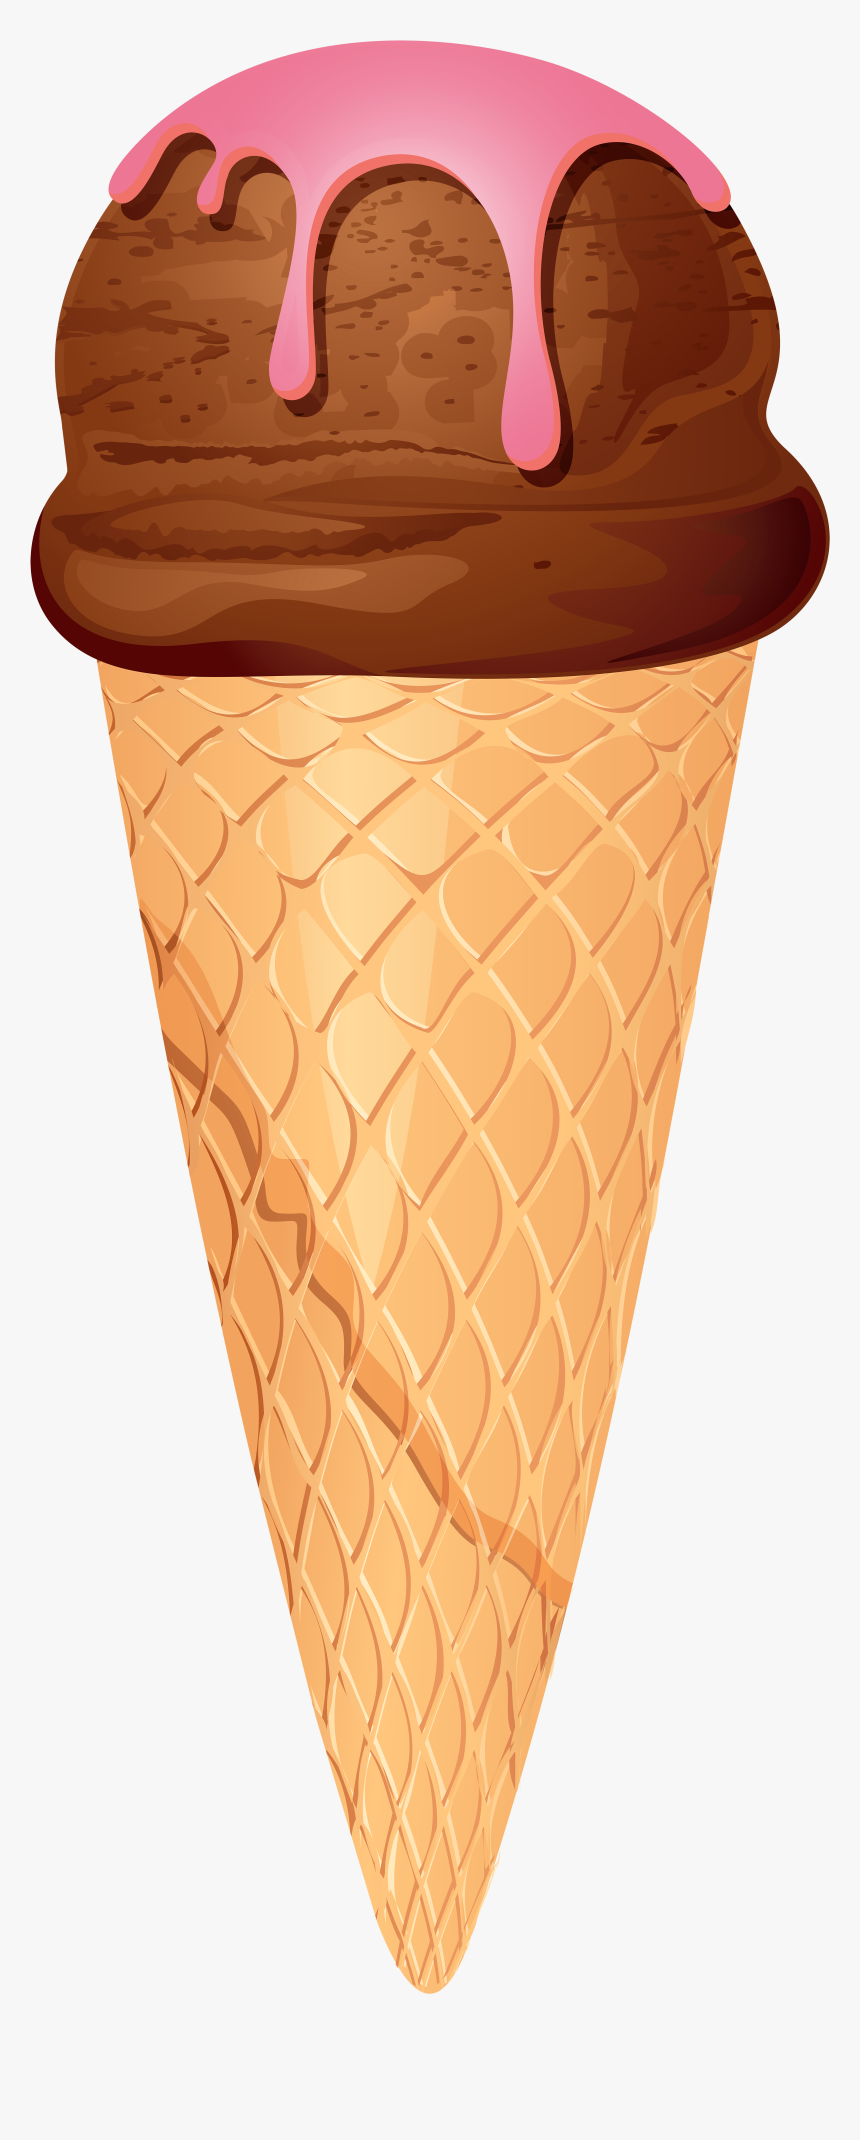 Chocolate Ice Cream Cone Png Clip Art - Ice Cream Cone Png, Transparent Png, Free Download